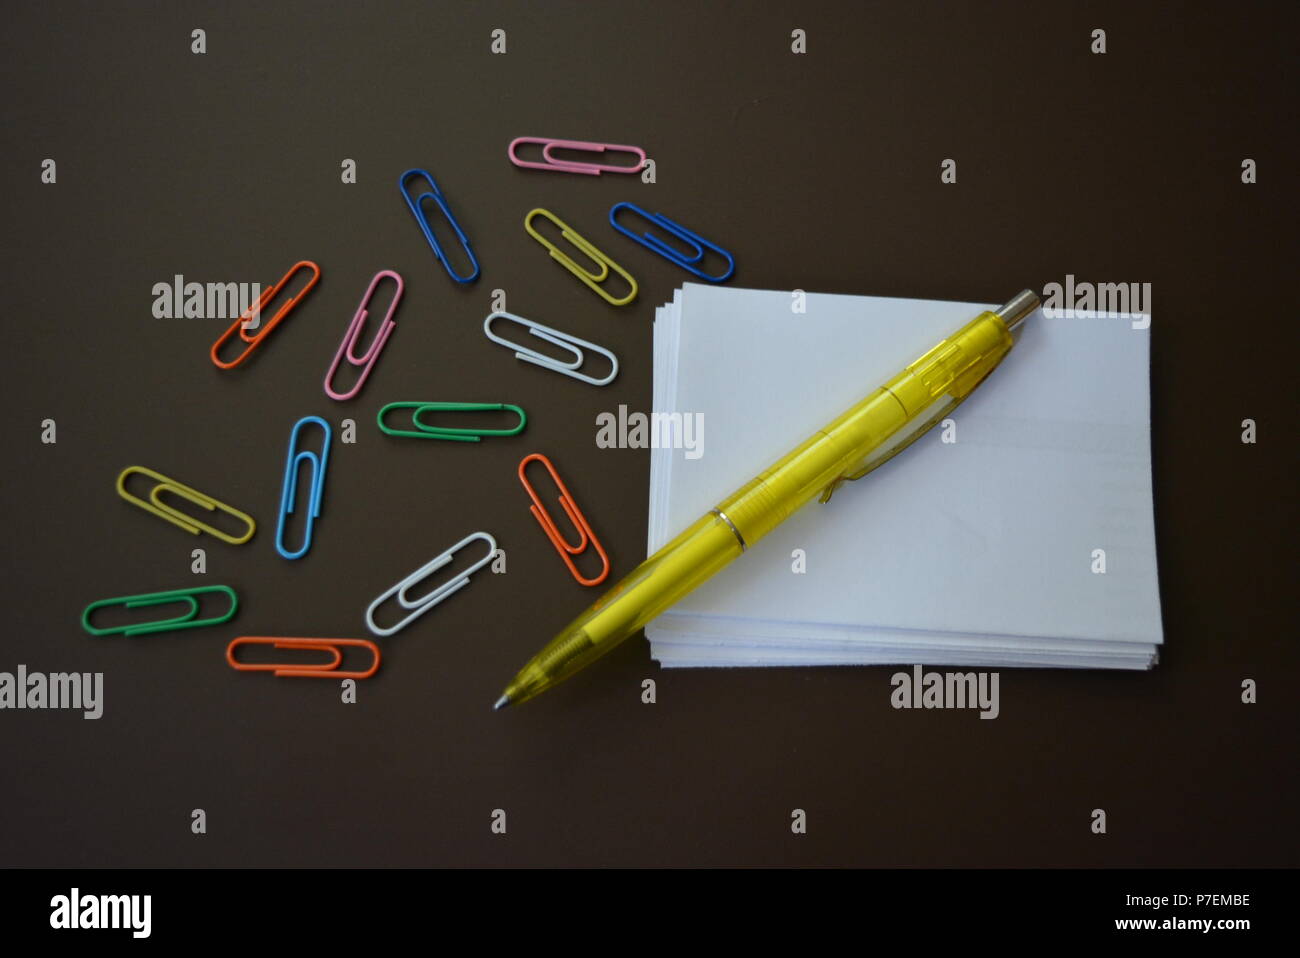 Color paperclips of different colors with sheets of white paper for recording and a yellow pen on a brown matte background. Stock Photo